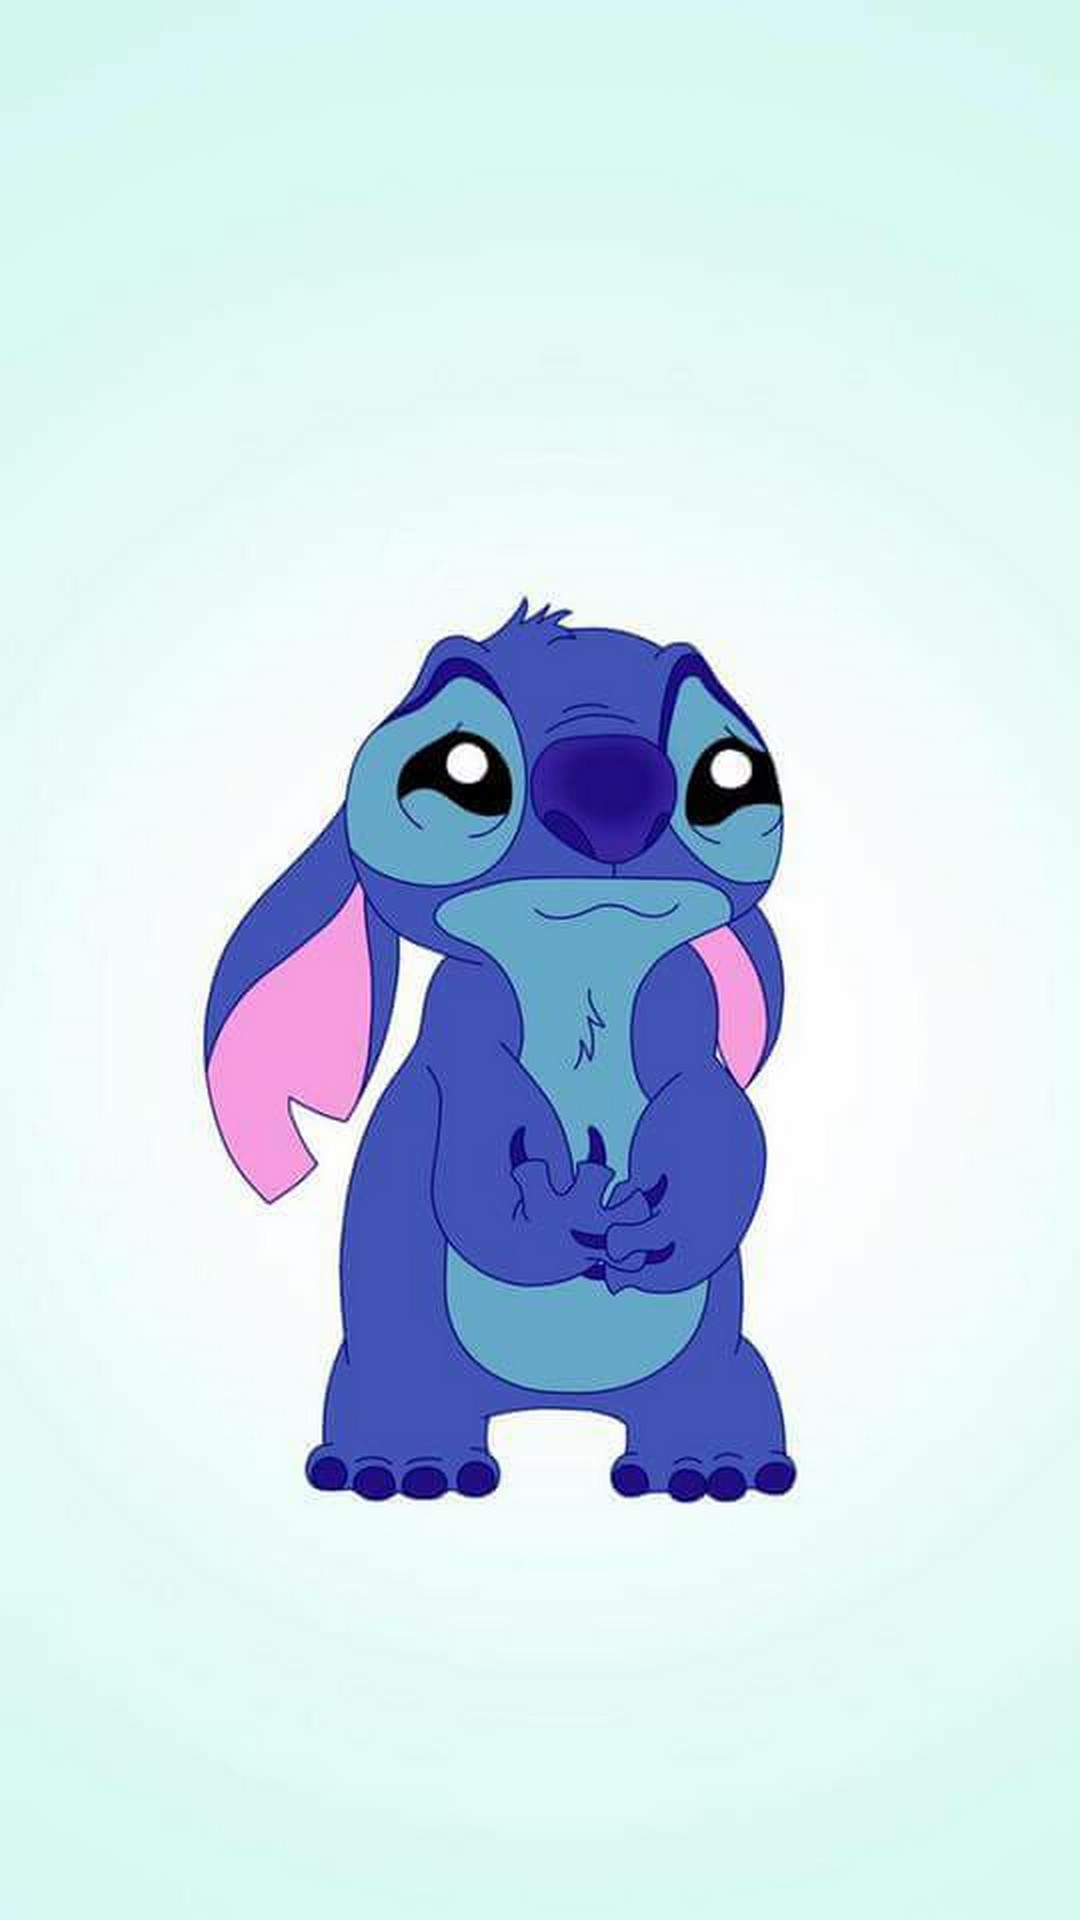 Stitch Wallpaper For Mobile Android Resolution 1080x1920